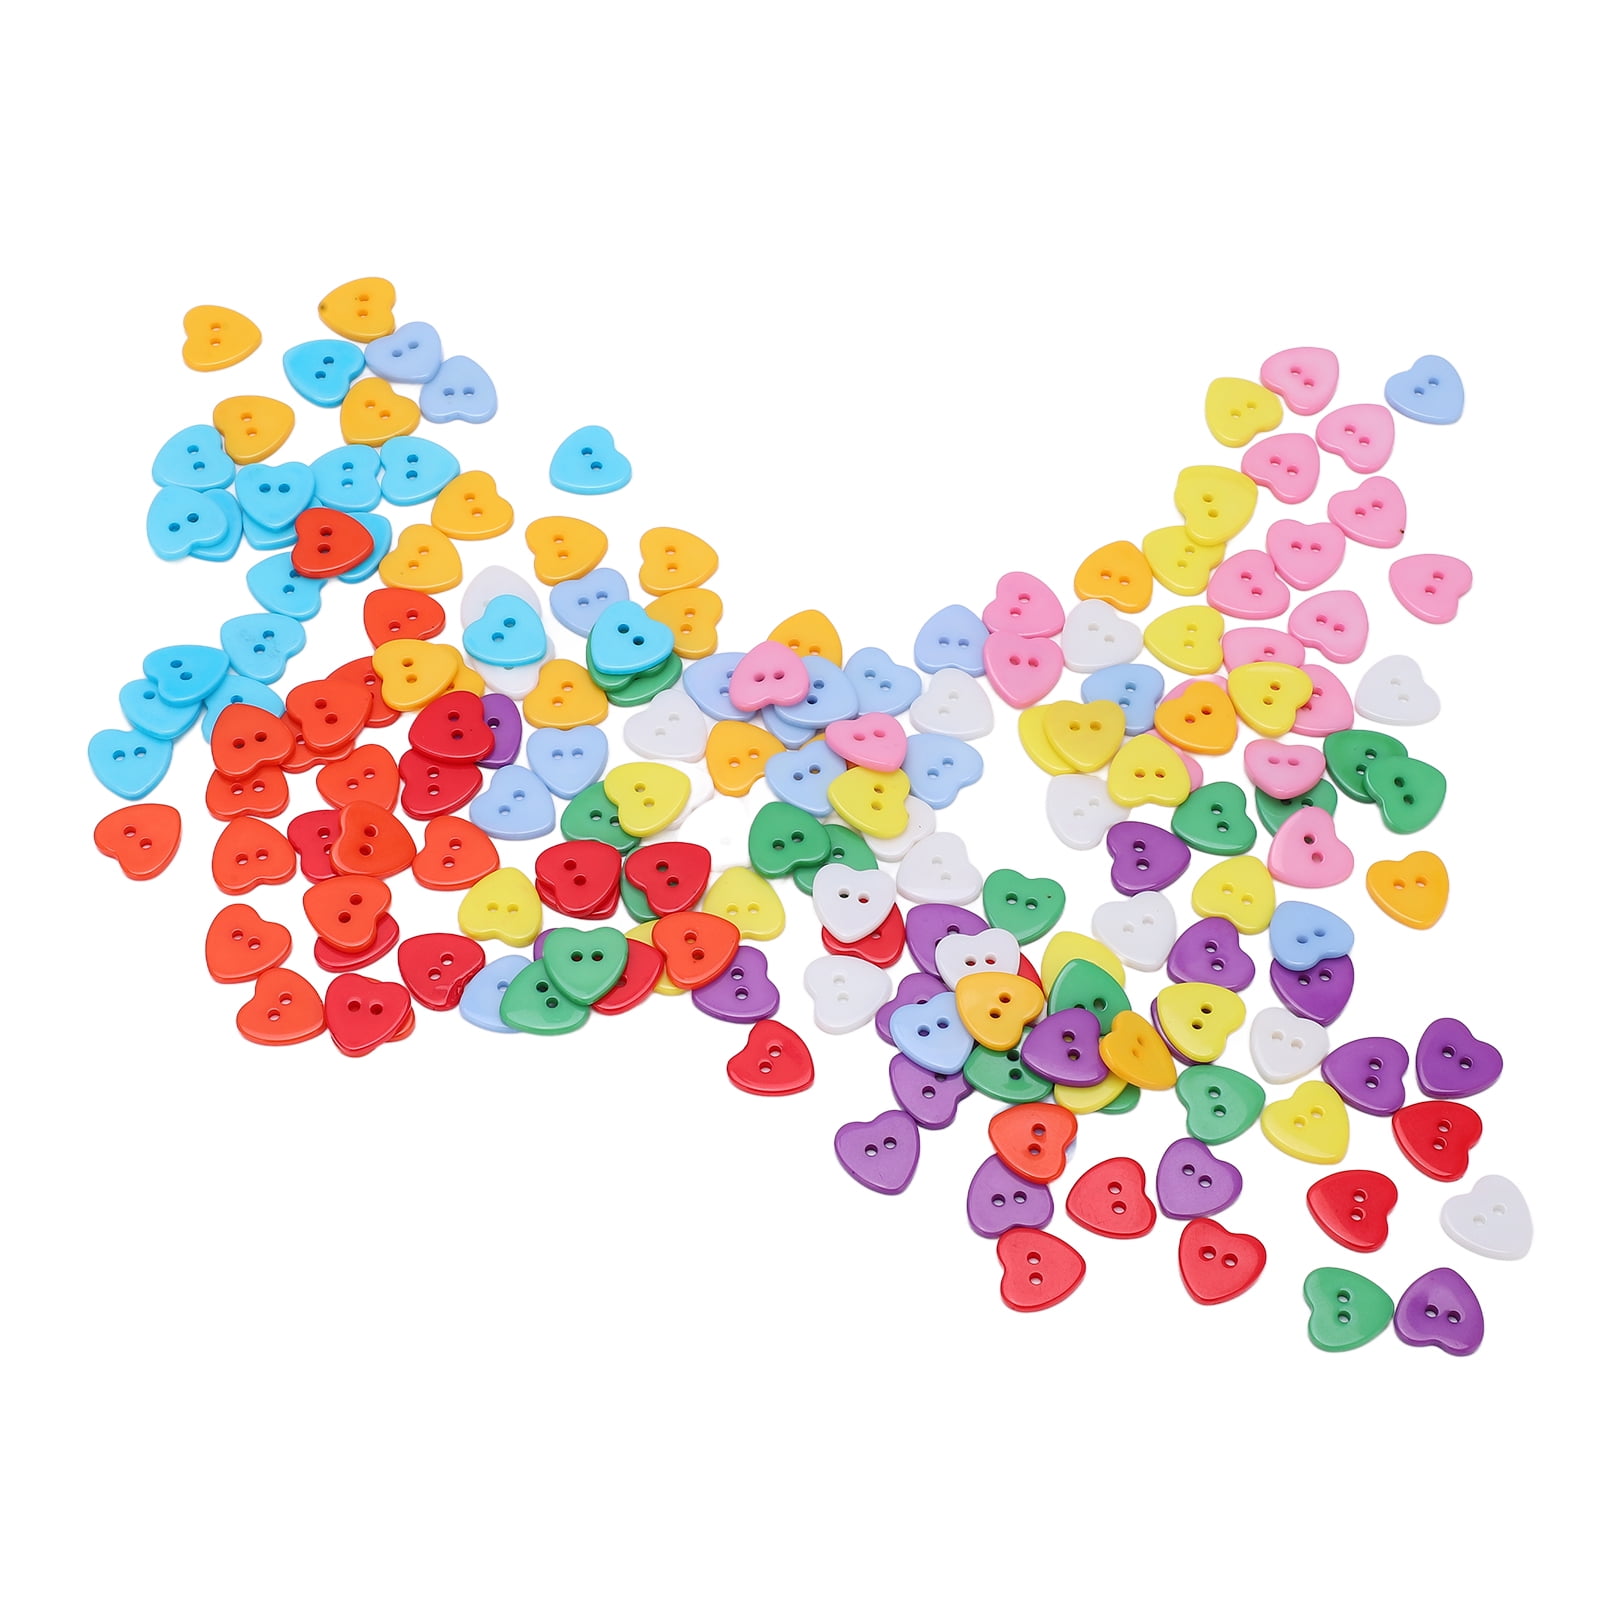 500 mixed color Mini alphabet die cuts hand punched confetti party supplies table decor 